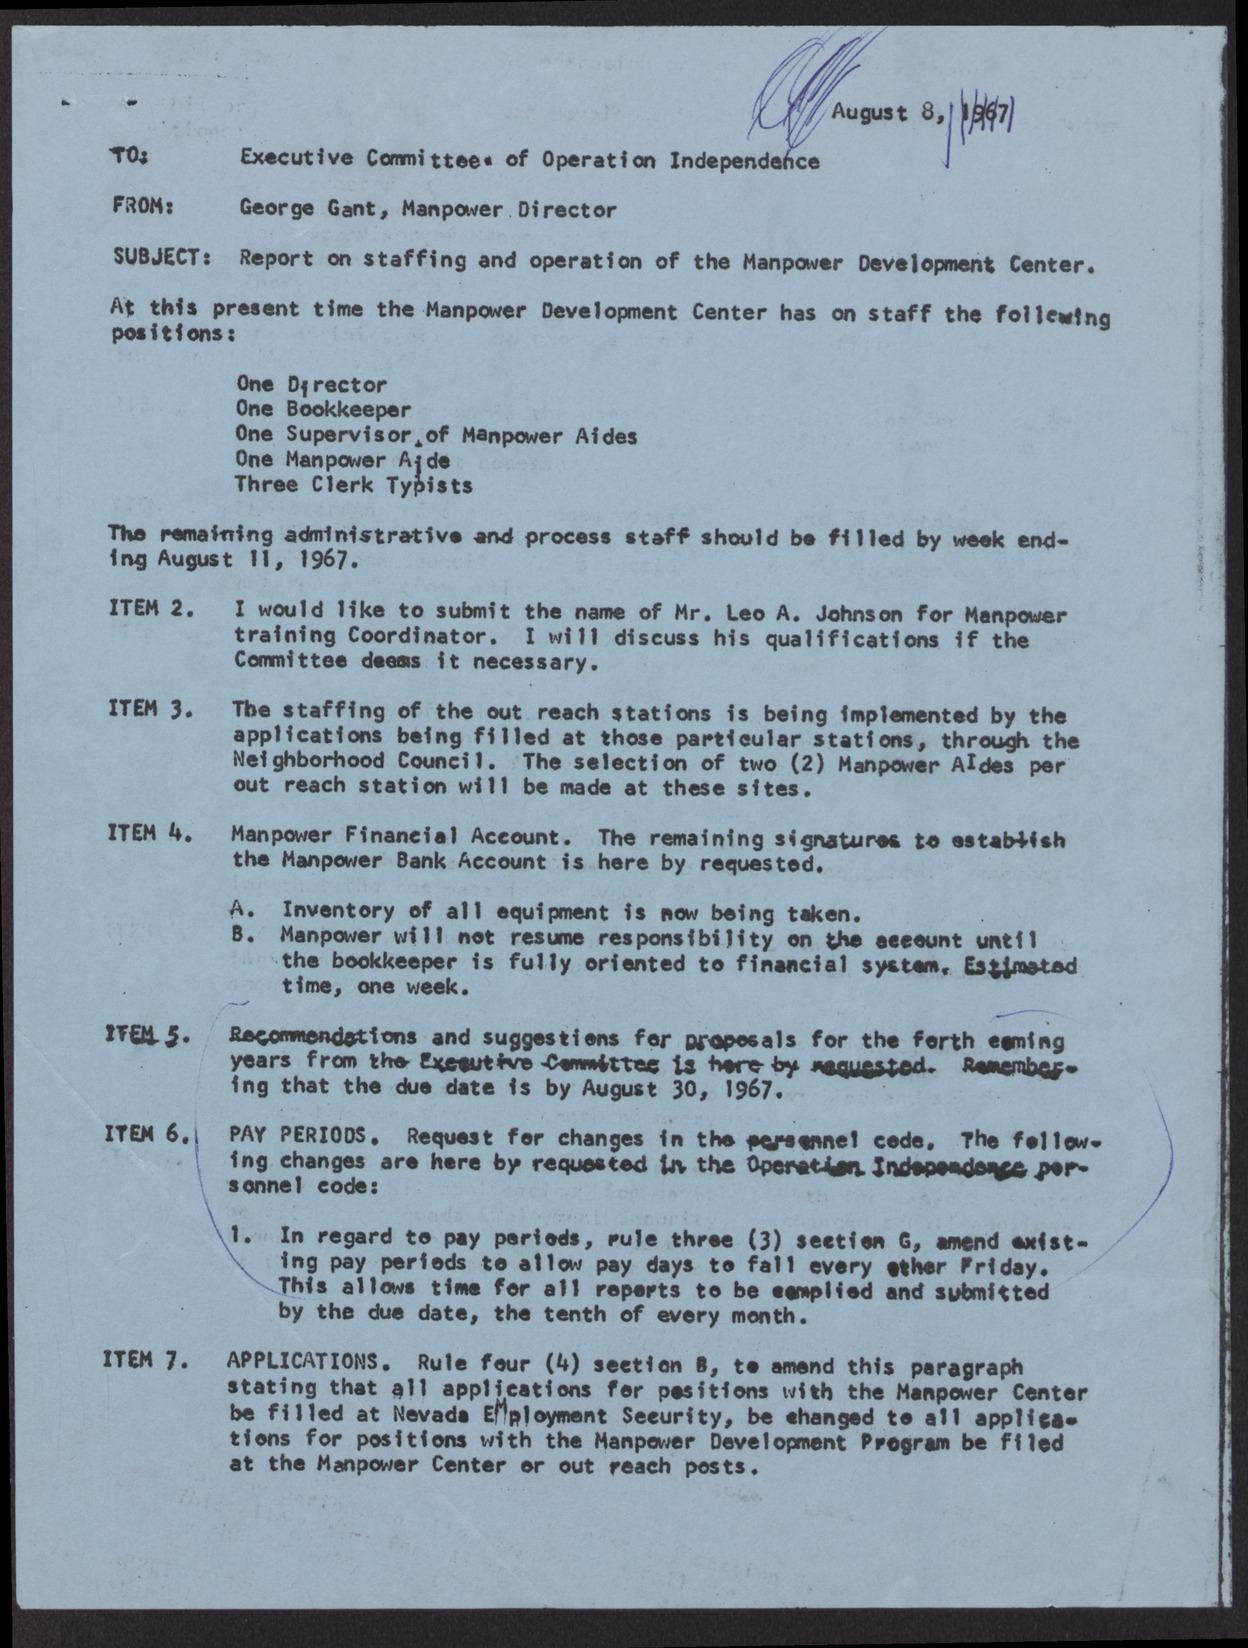 Letter to the Executive Committee of Operation Independence from George Gant (2 pages), August 8, 1967